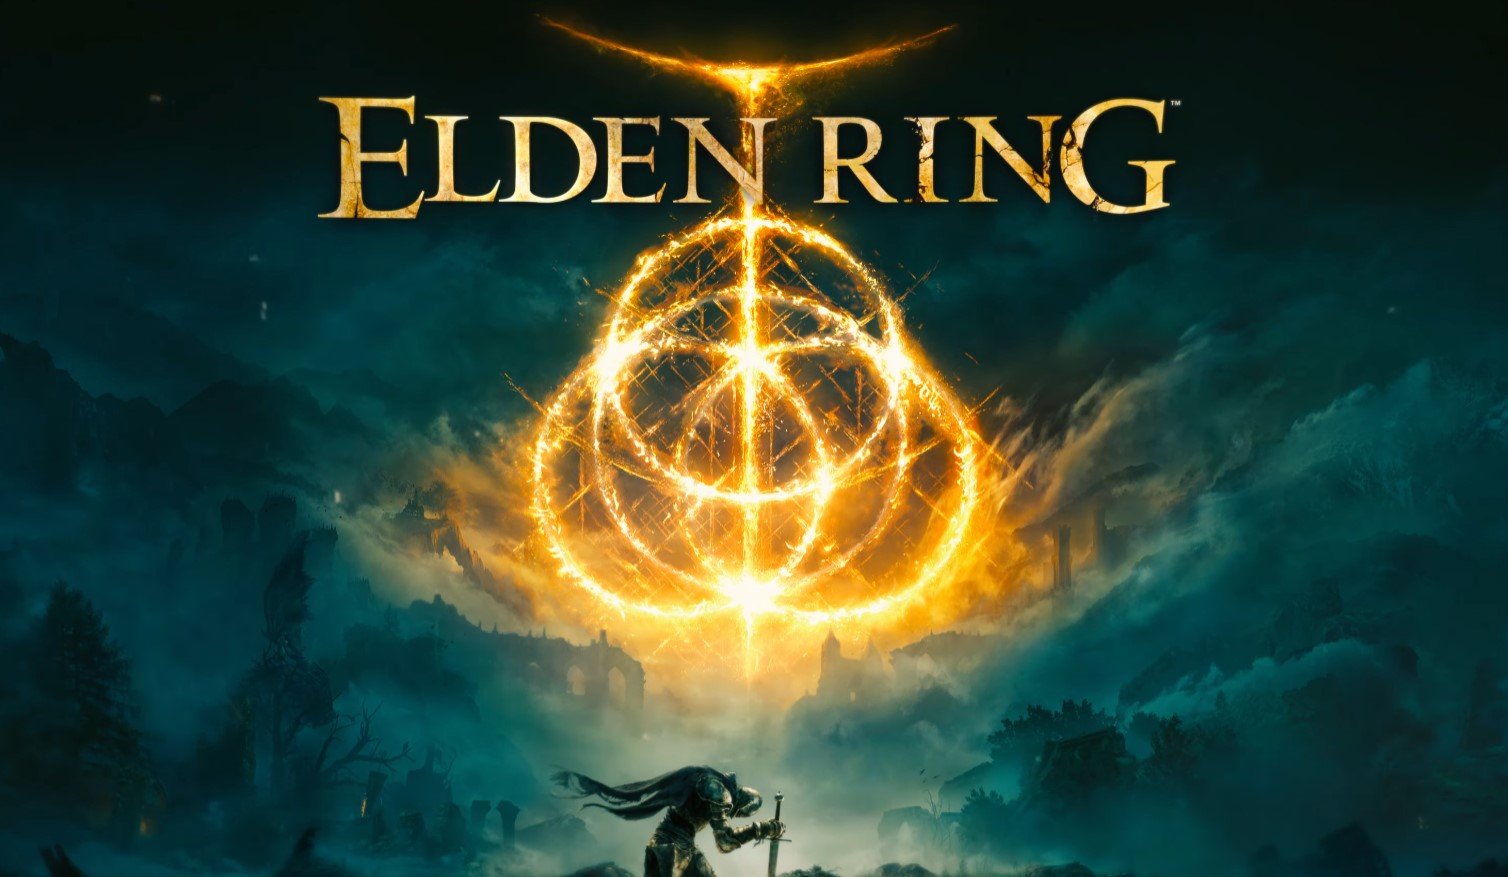 Elden Ring has finally reappeared with a new trailer and 2022 release